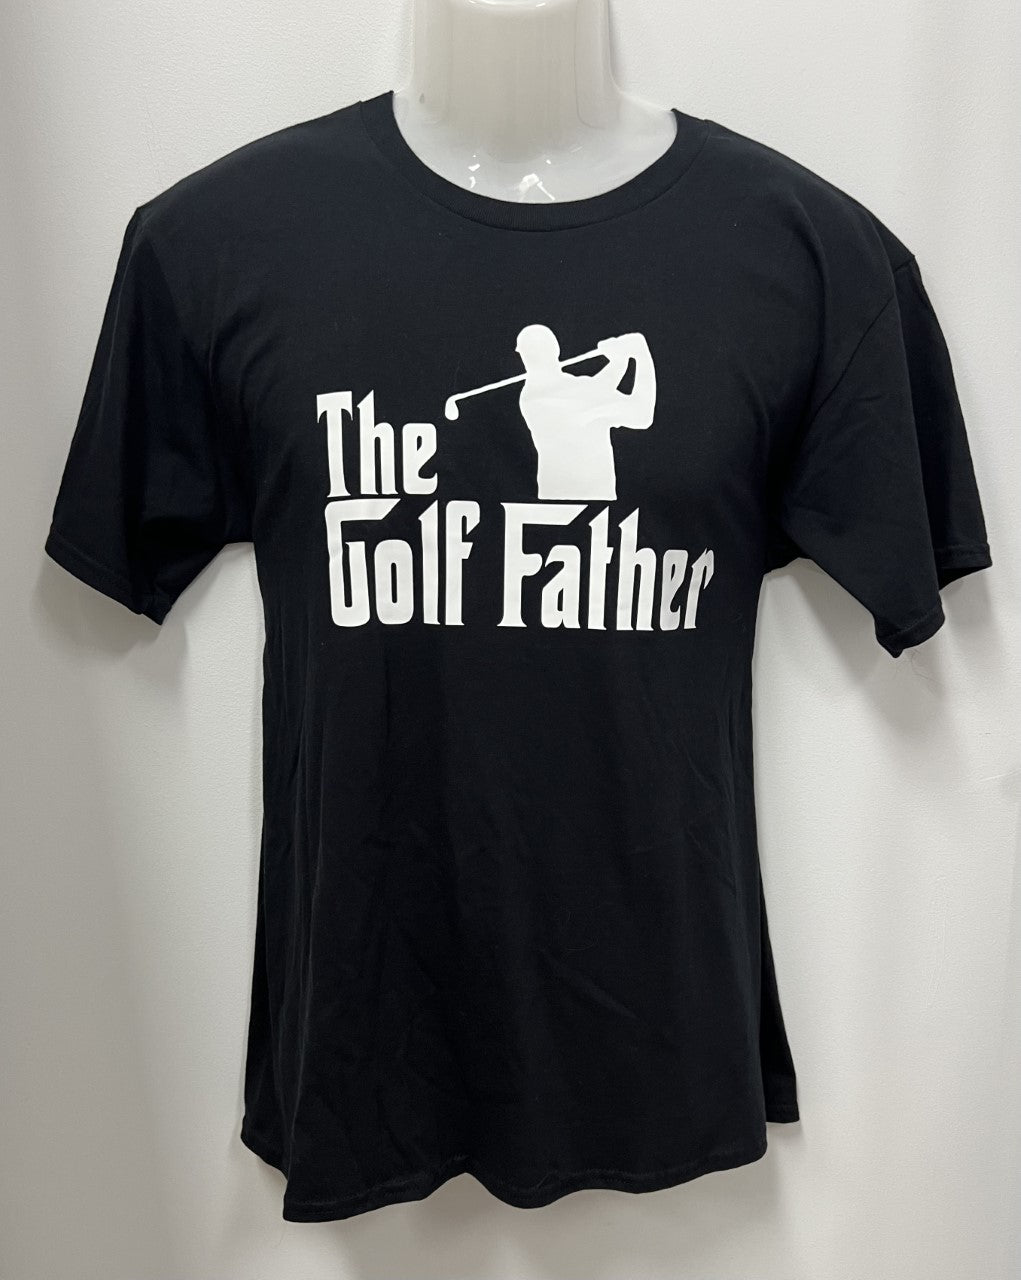 The Golf Father Short Sleeve T-shirt